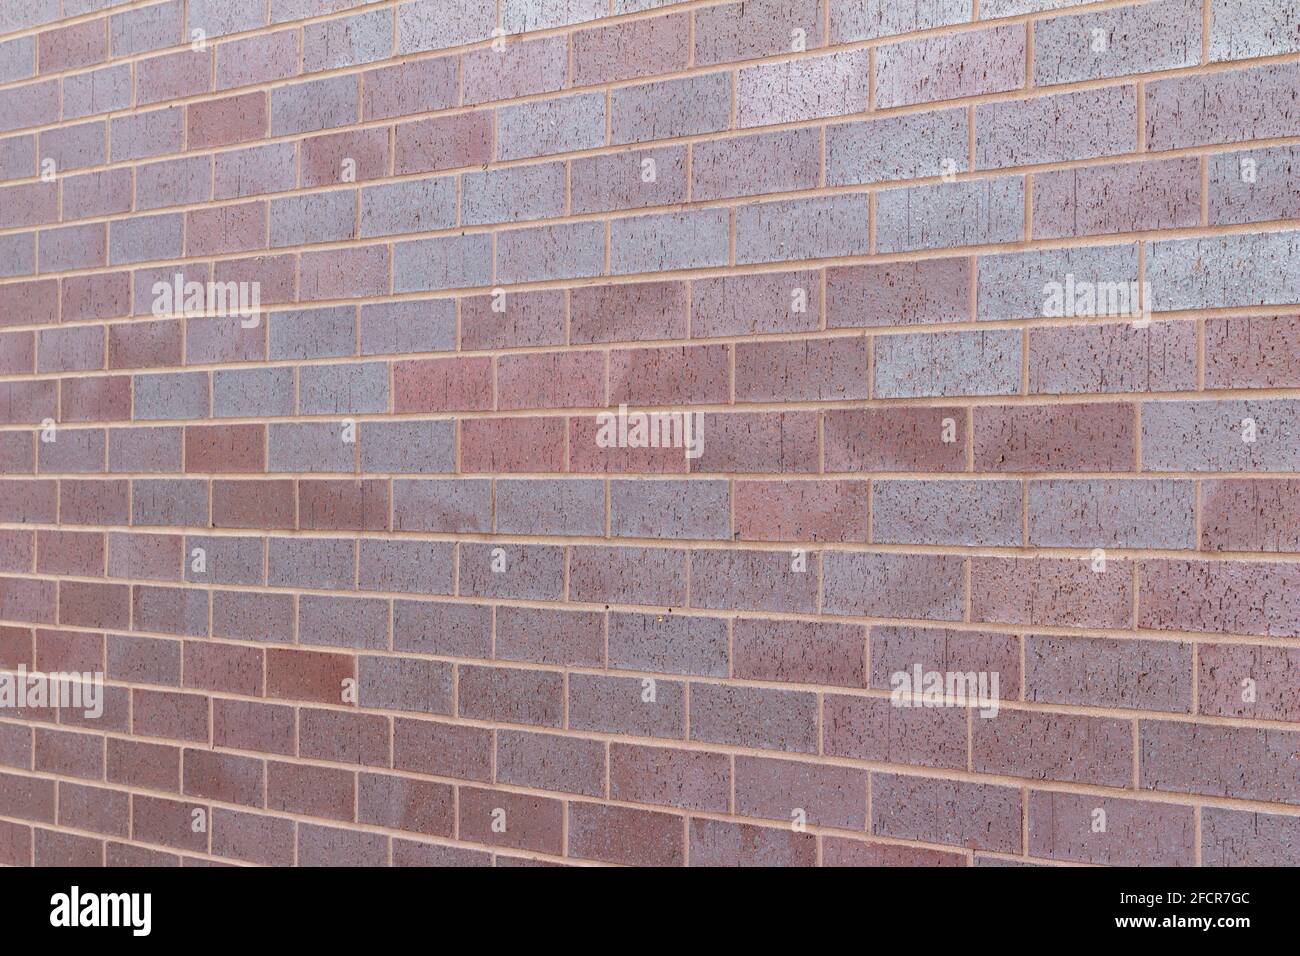 Title Vintage magenta color brick wall texture background in a 1/3 offset stretcher bond pattern, with bricks in varying shades of red and blue Stock Photo